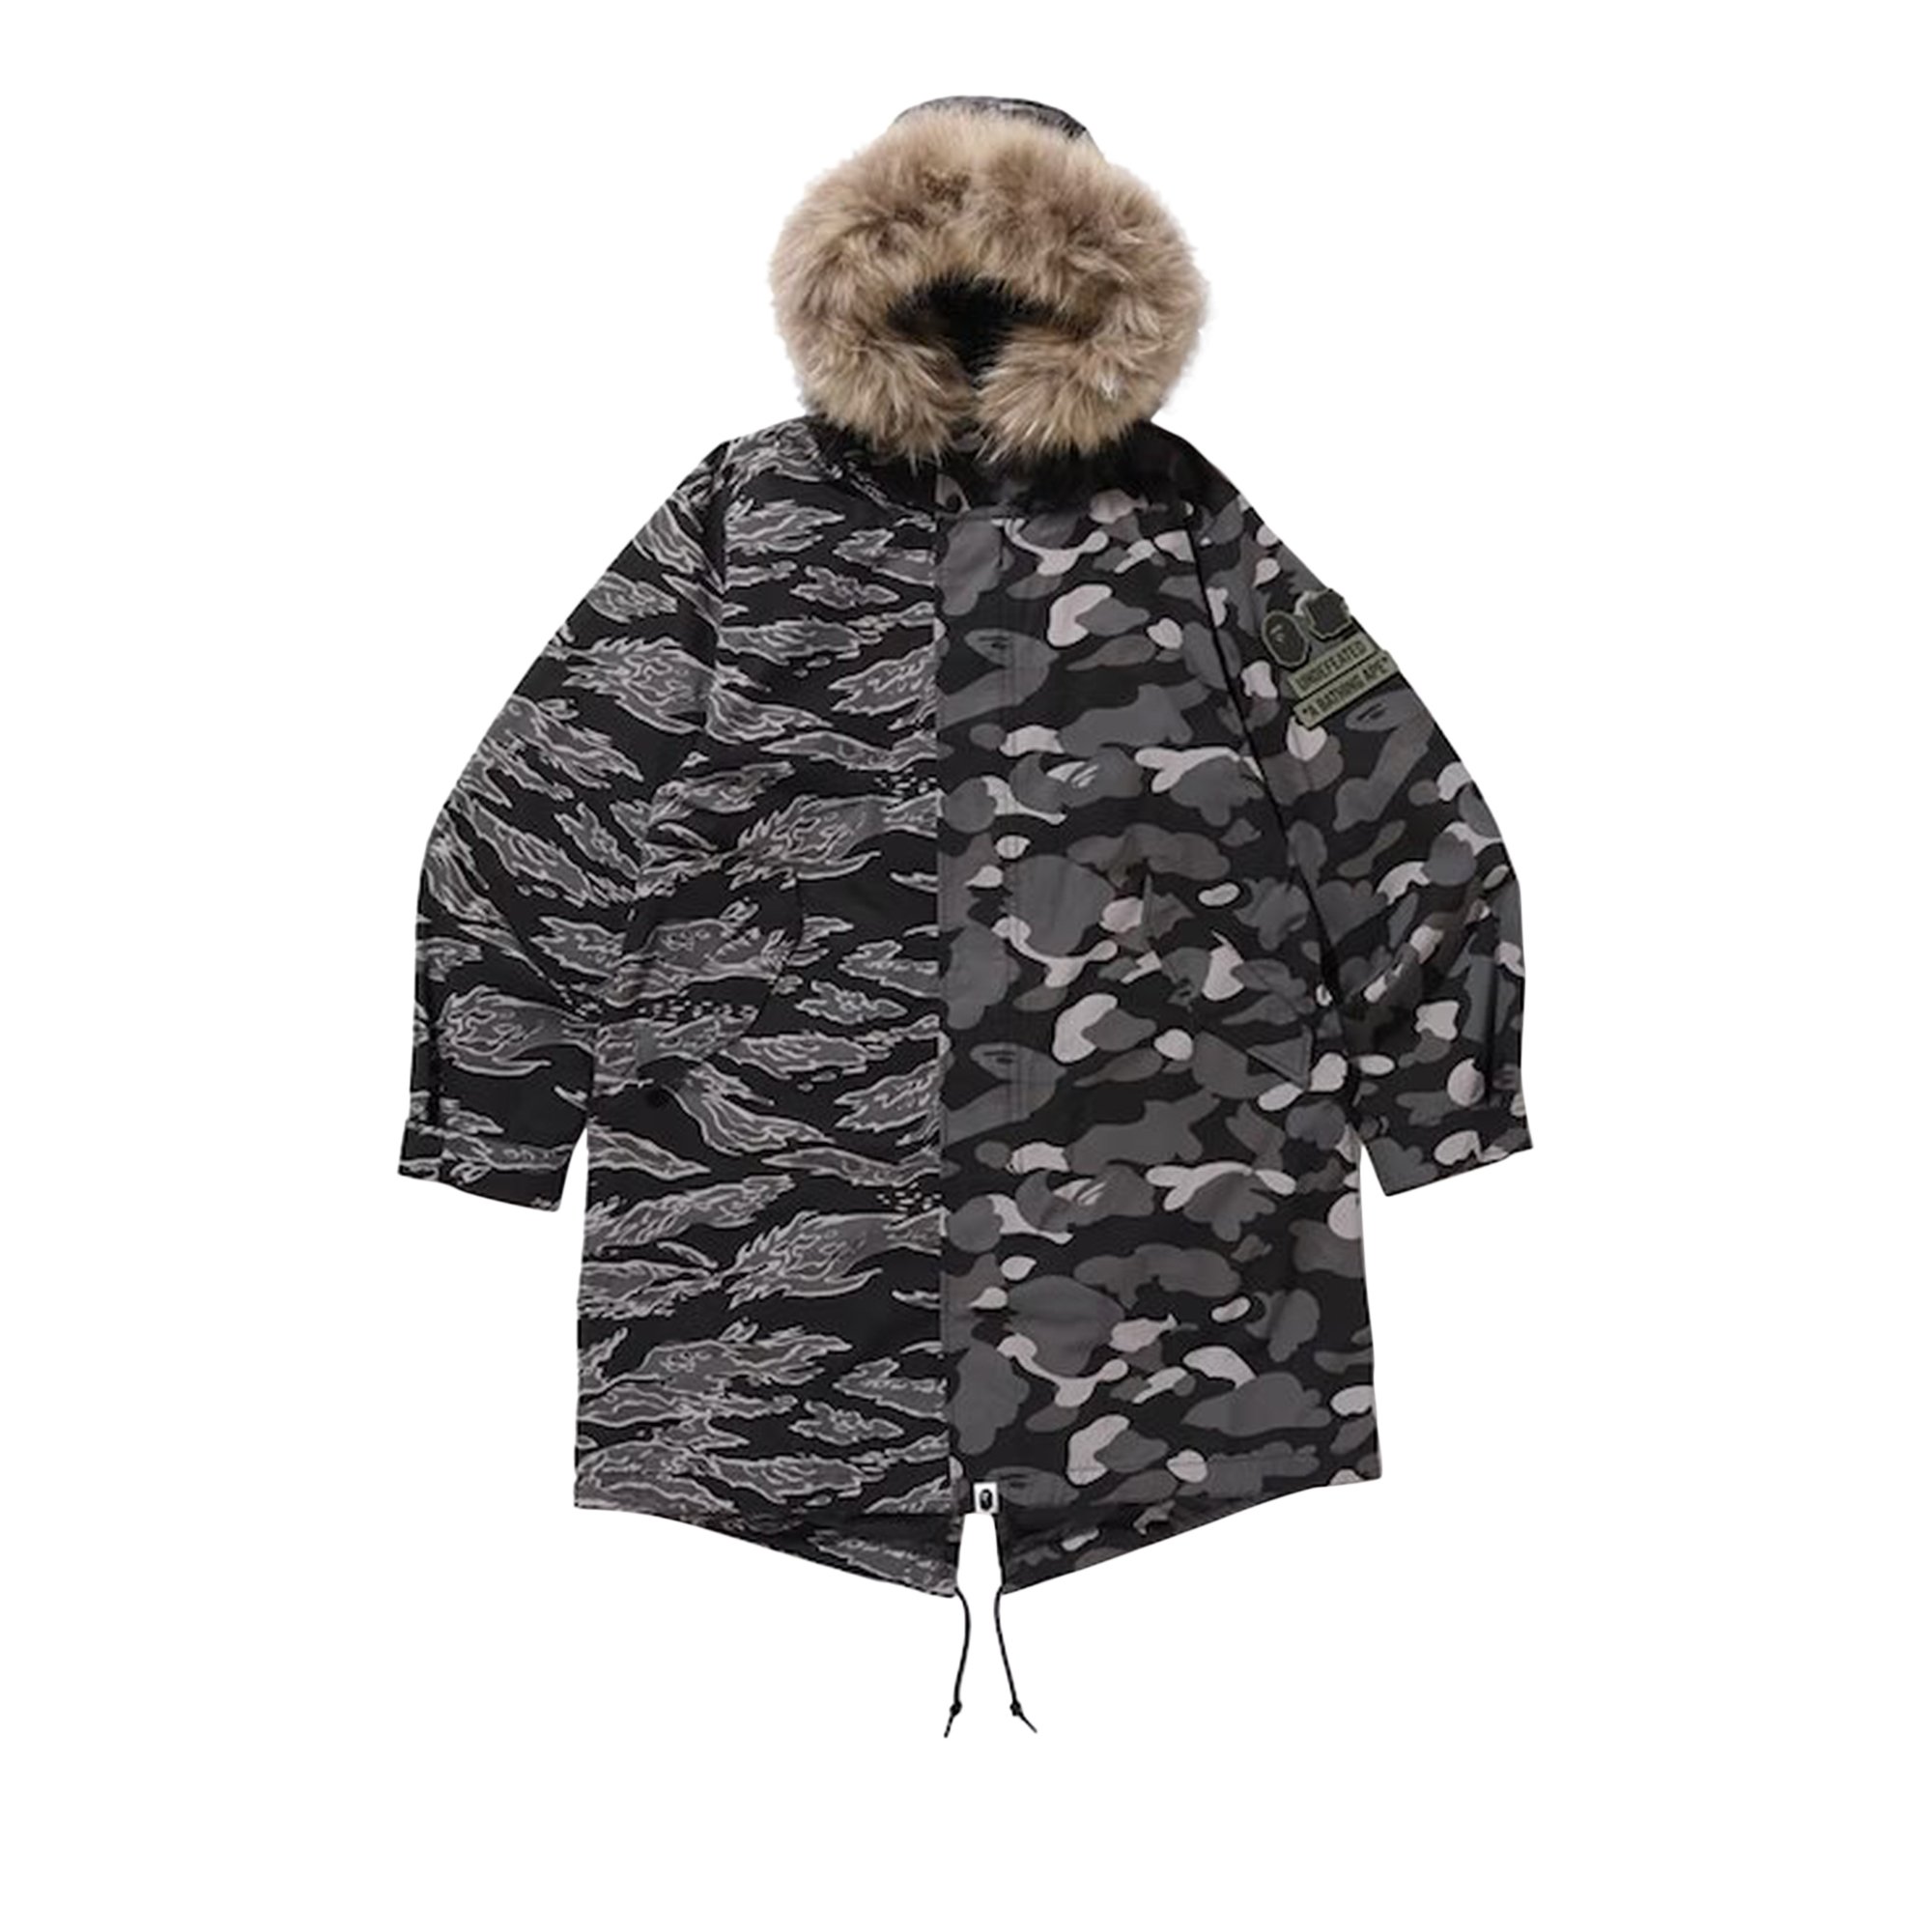 BAPE x Undefeated M-51 Hoodie Jacket 'Silver'